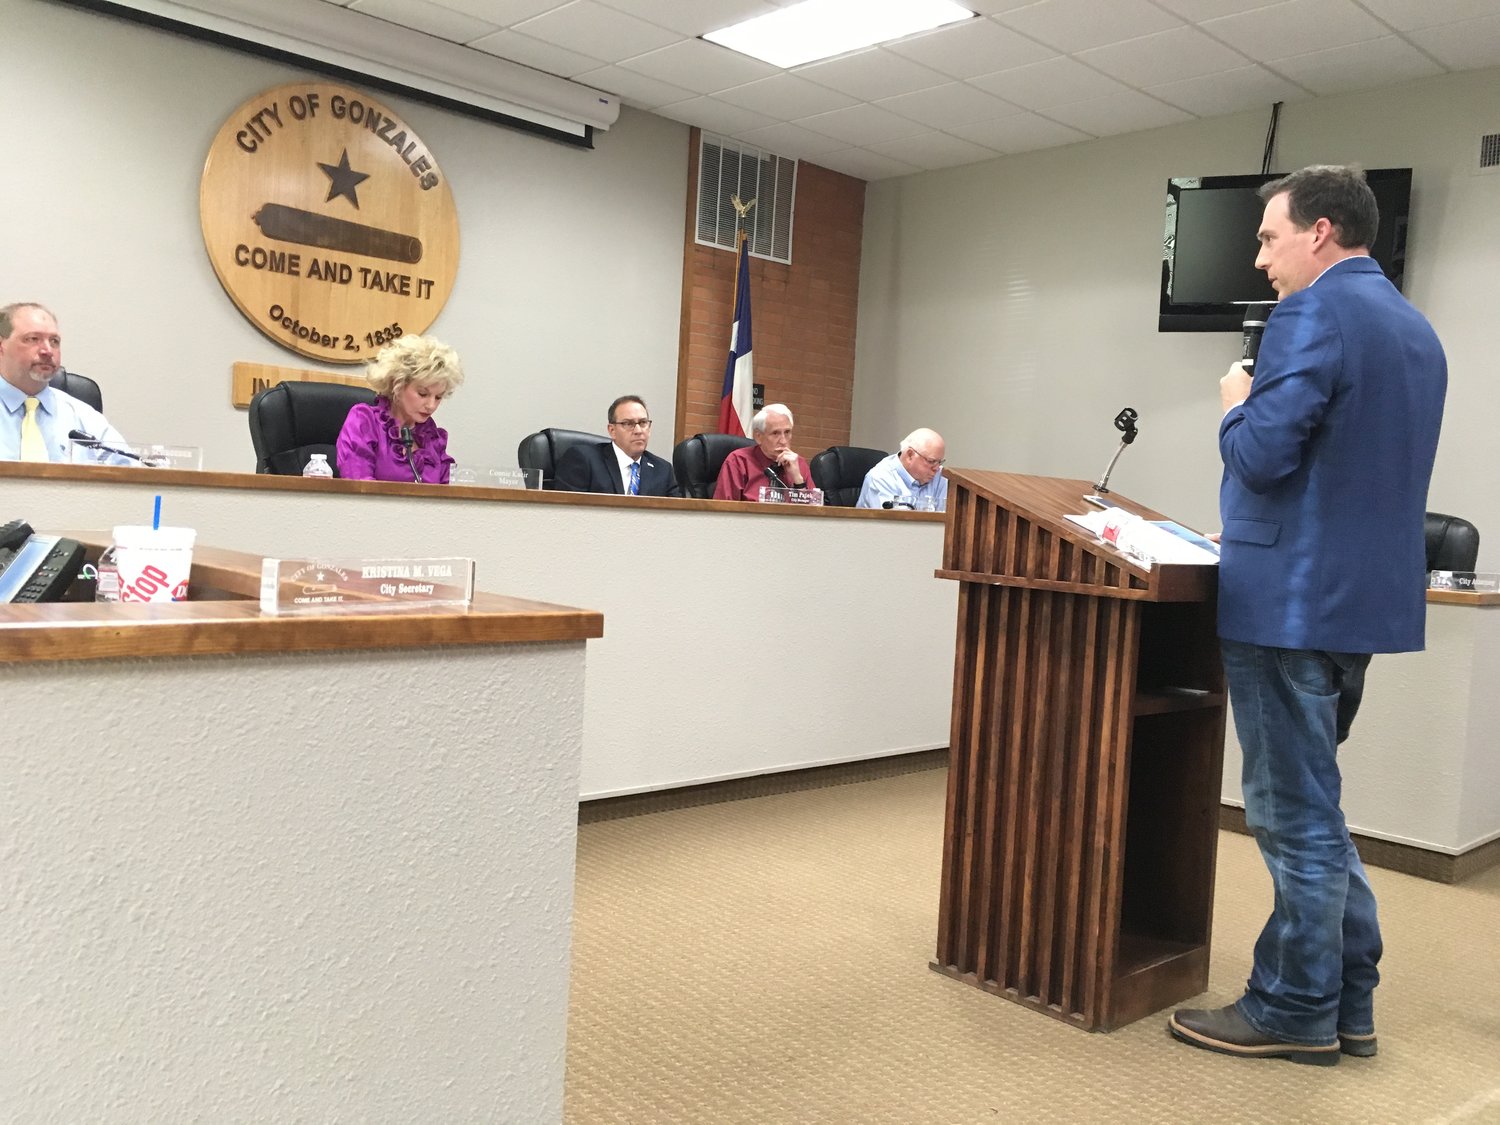 Festival promoter Marcus Federman spoke to the Gonzales City Council last Thursday during the comments section of the workshop held to discuss the merits of having his summertime bash Float Fest come to town this July. The comments ranged from economic boom to caution to fire-and-brimstone.